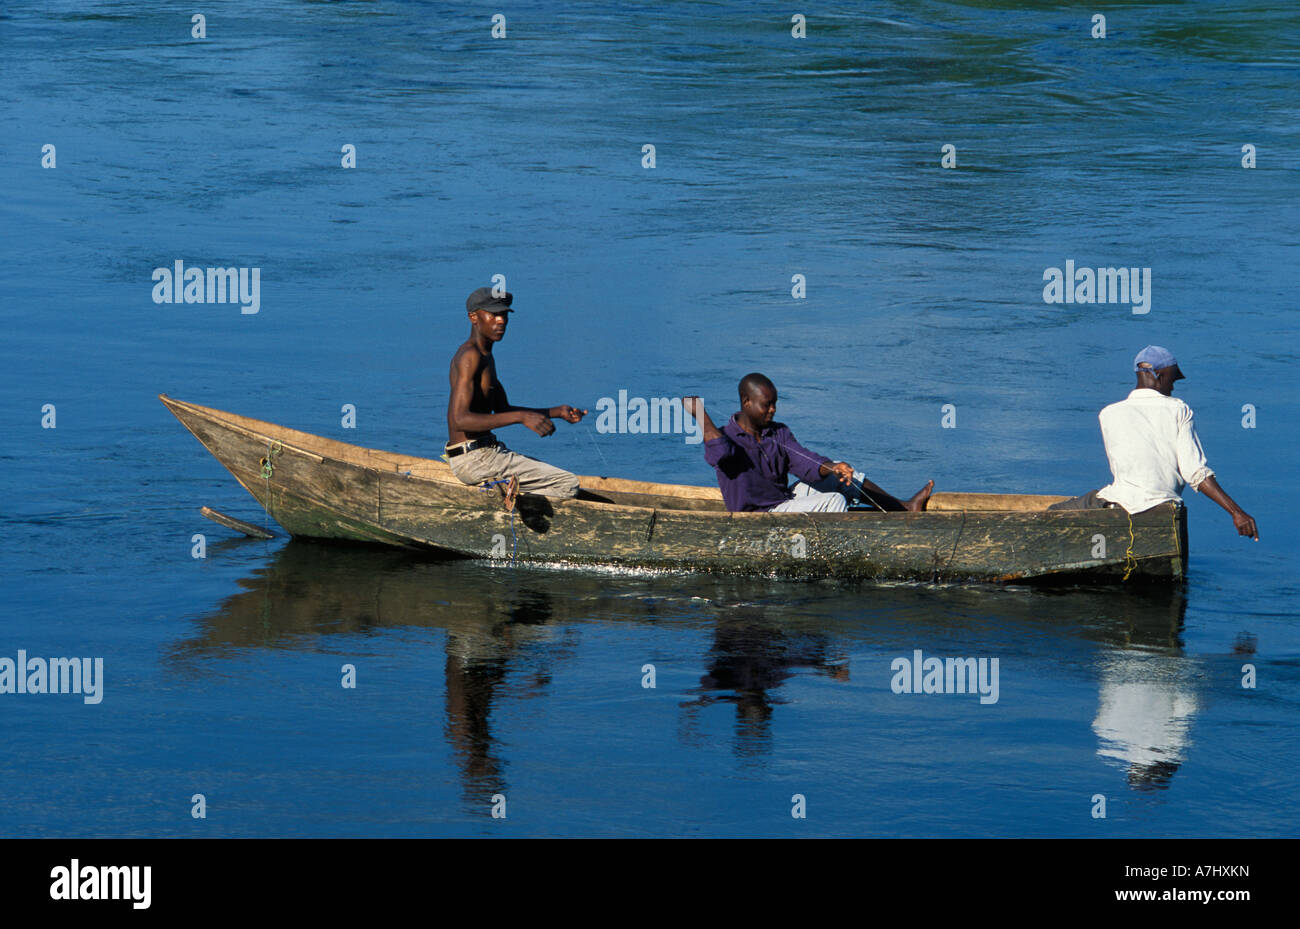 Fishing canoe on the Source of the Nile the location where Speke first  sighted the Source of the Nile in 1862 Jinja Uganda Stock Photo - Alamy